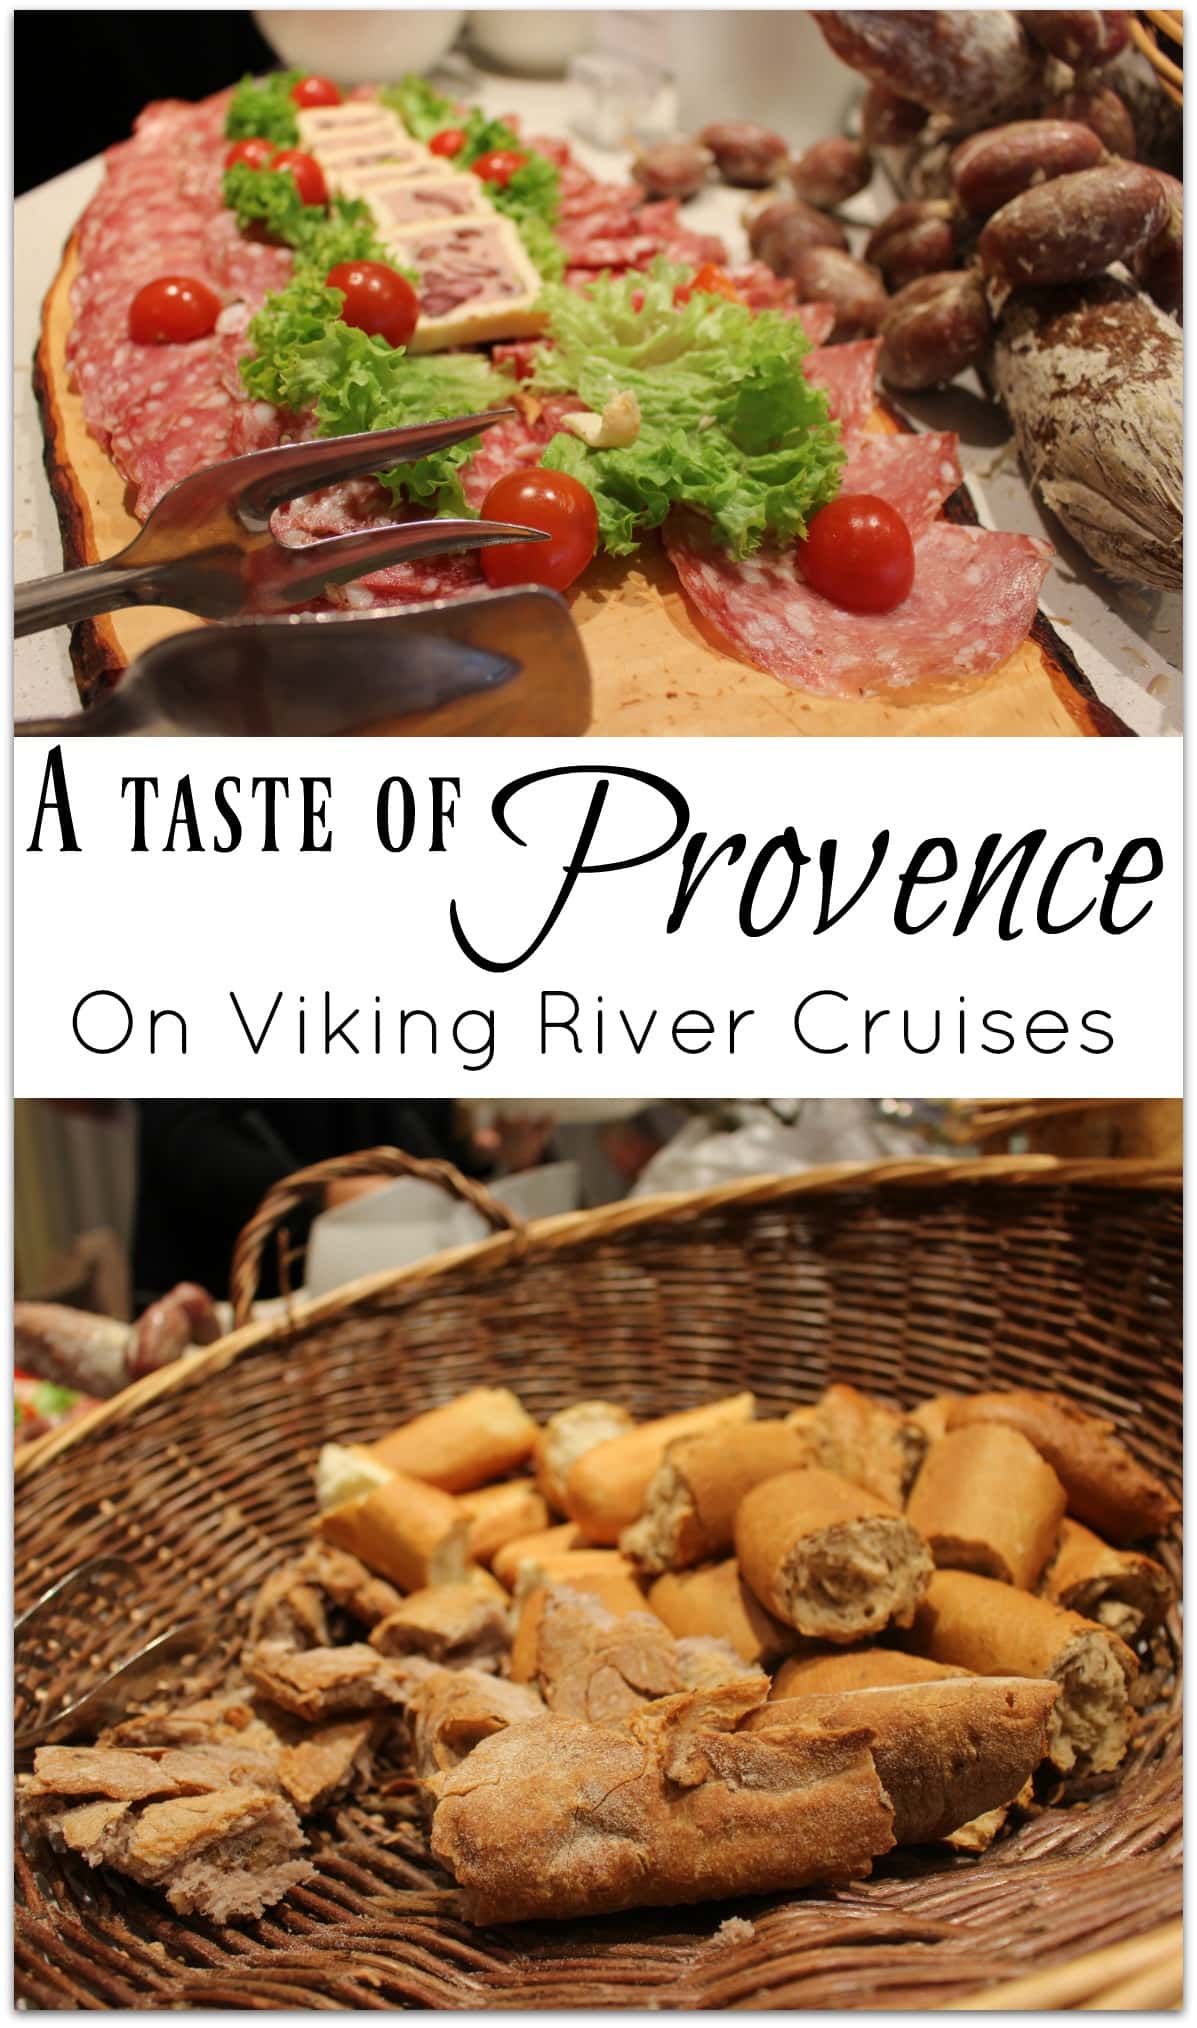 One of my favorite meals on the Viking River Cruise Lyon & Provence was the Taste of Provence lunch.